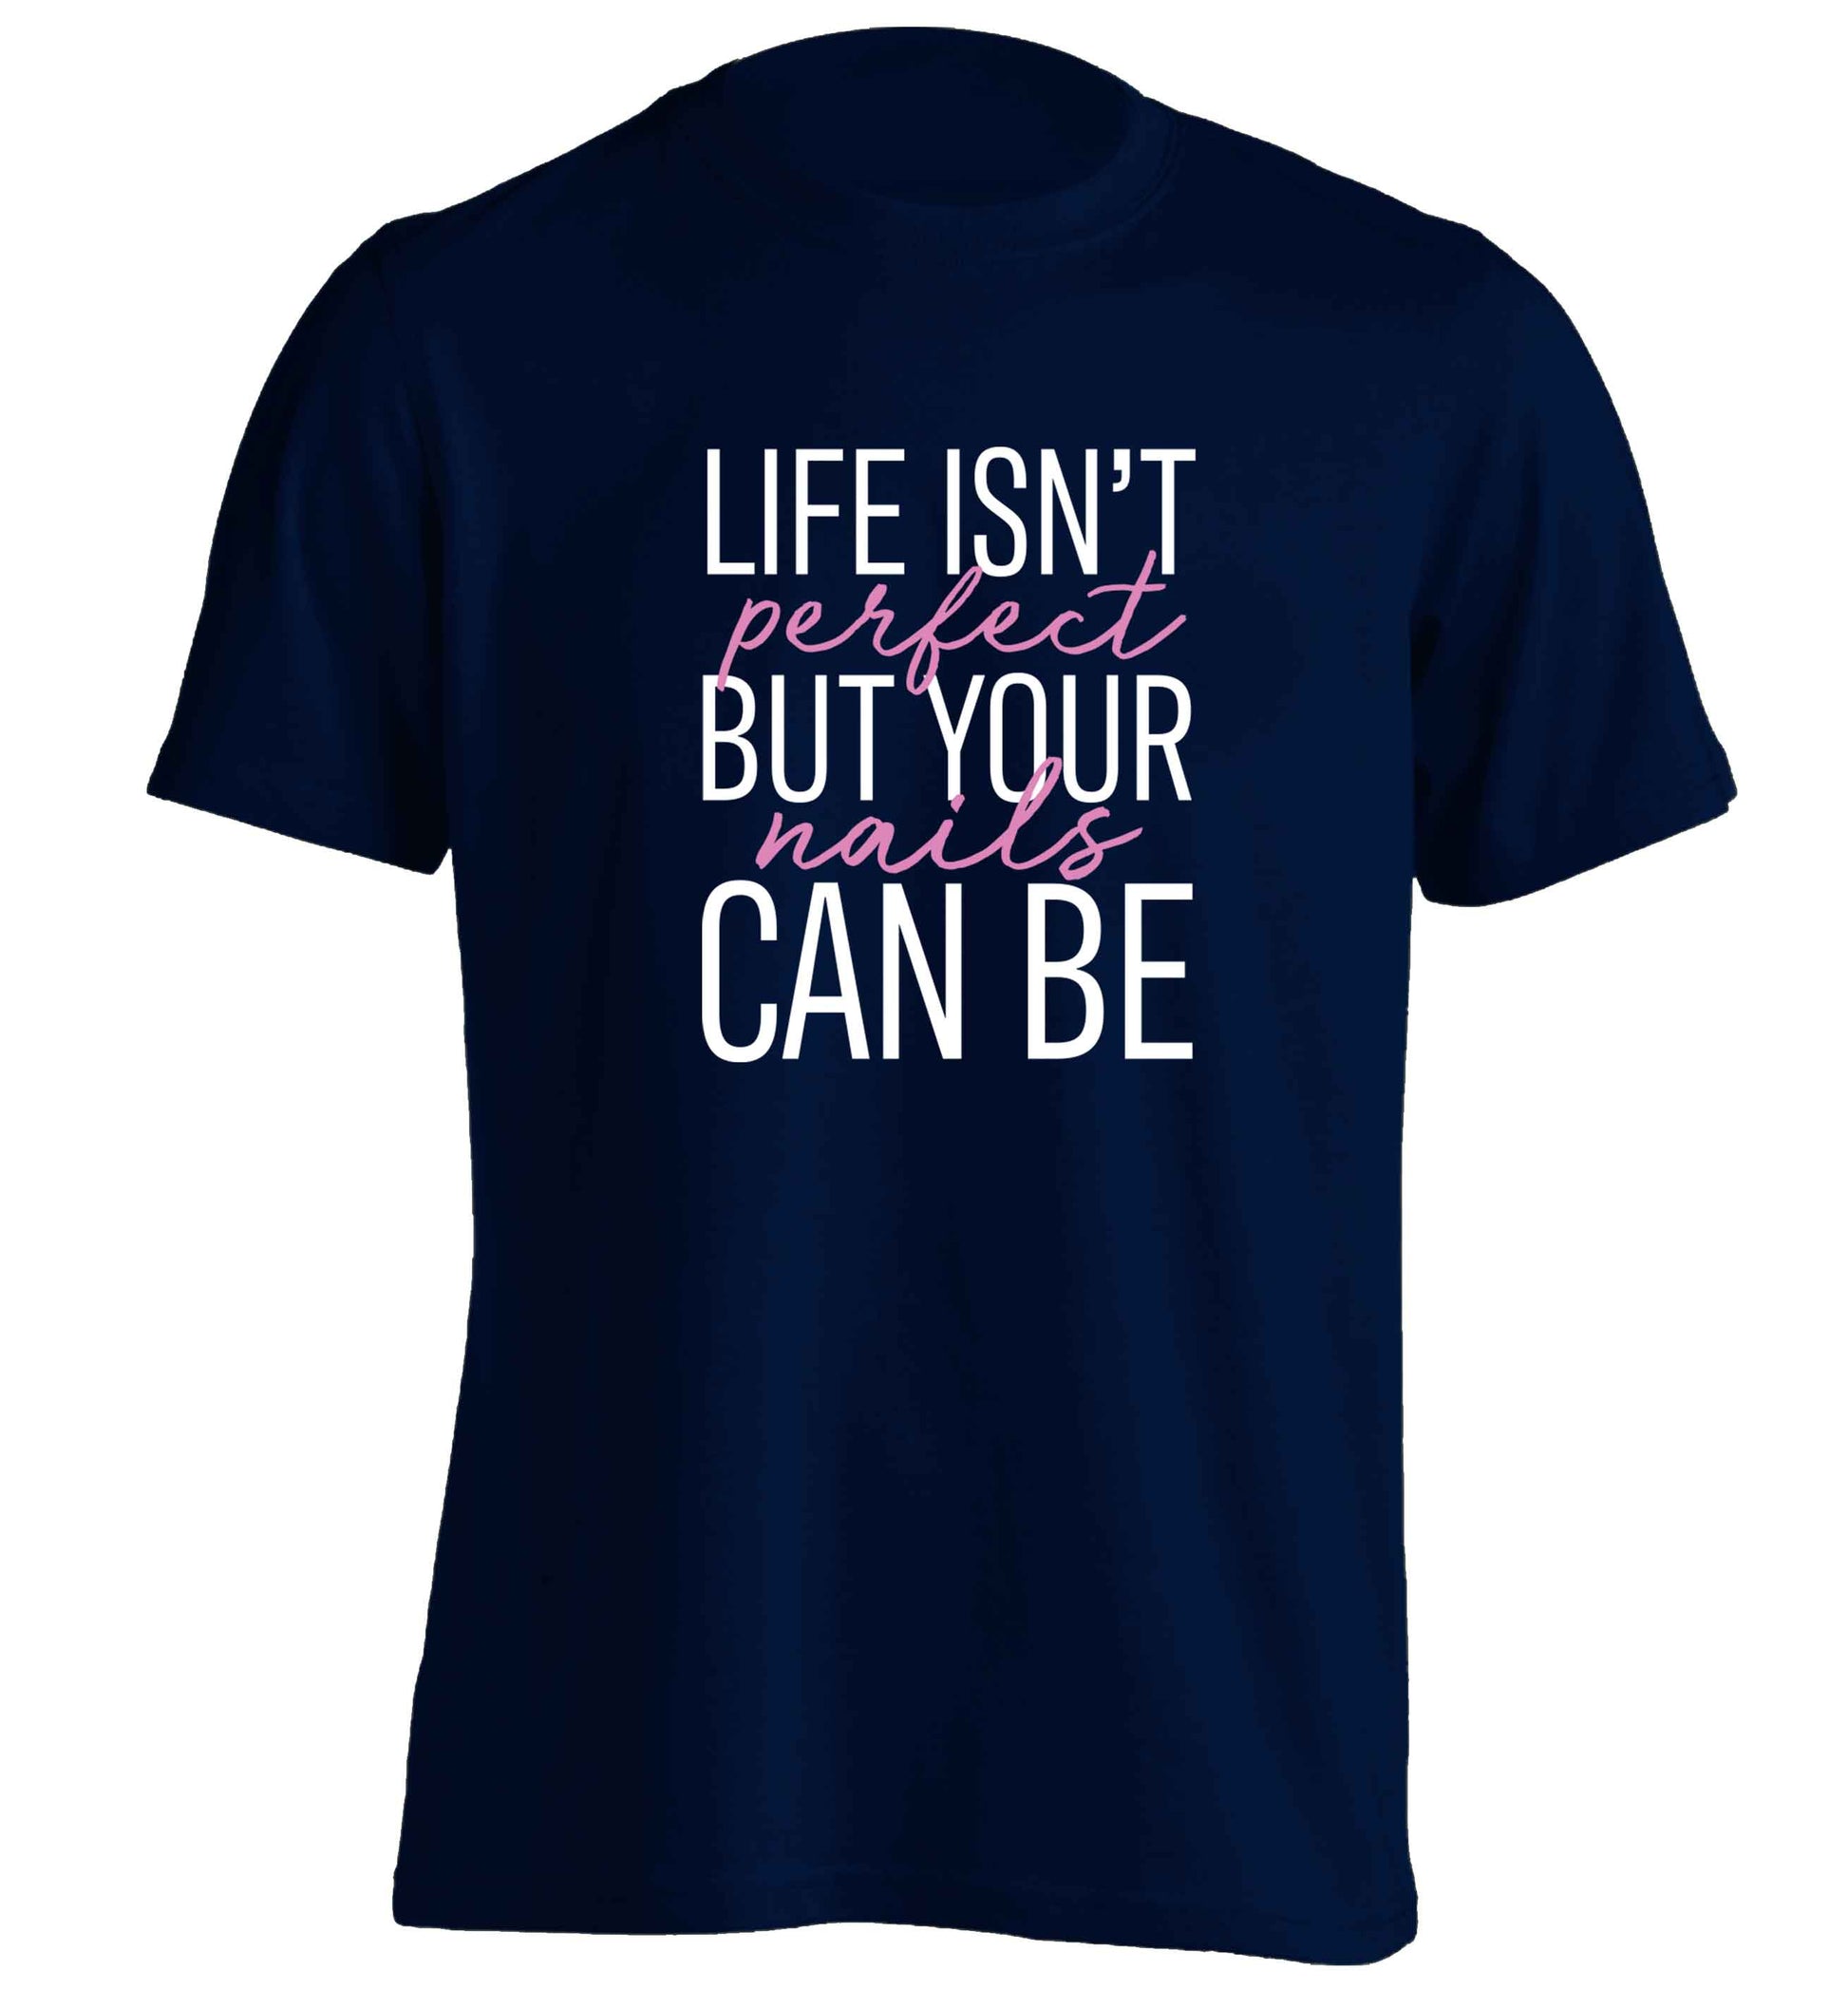 Life isn't perfect but your nails can be adults unisex navy Tshirt 2XL